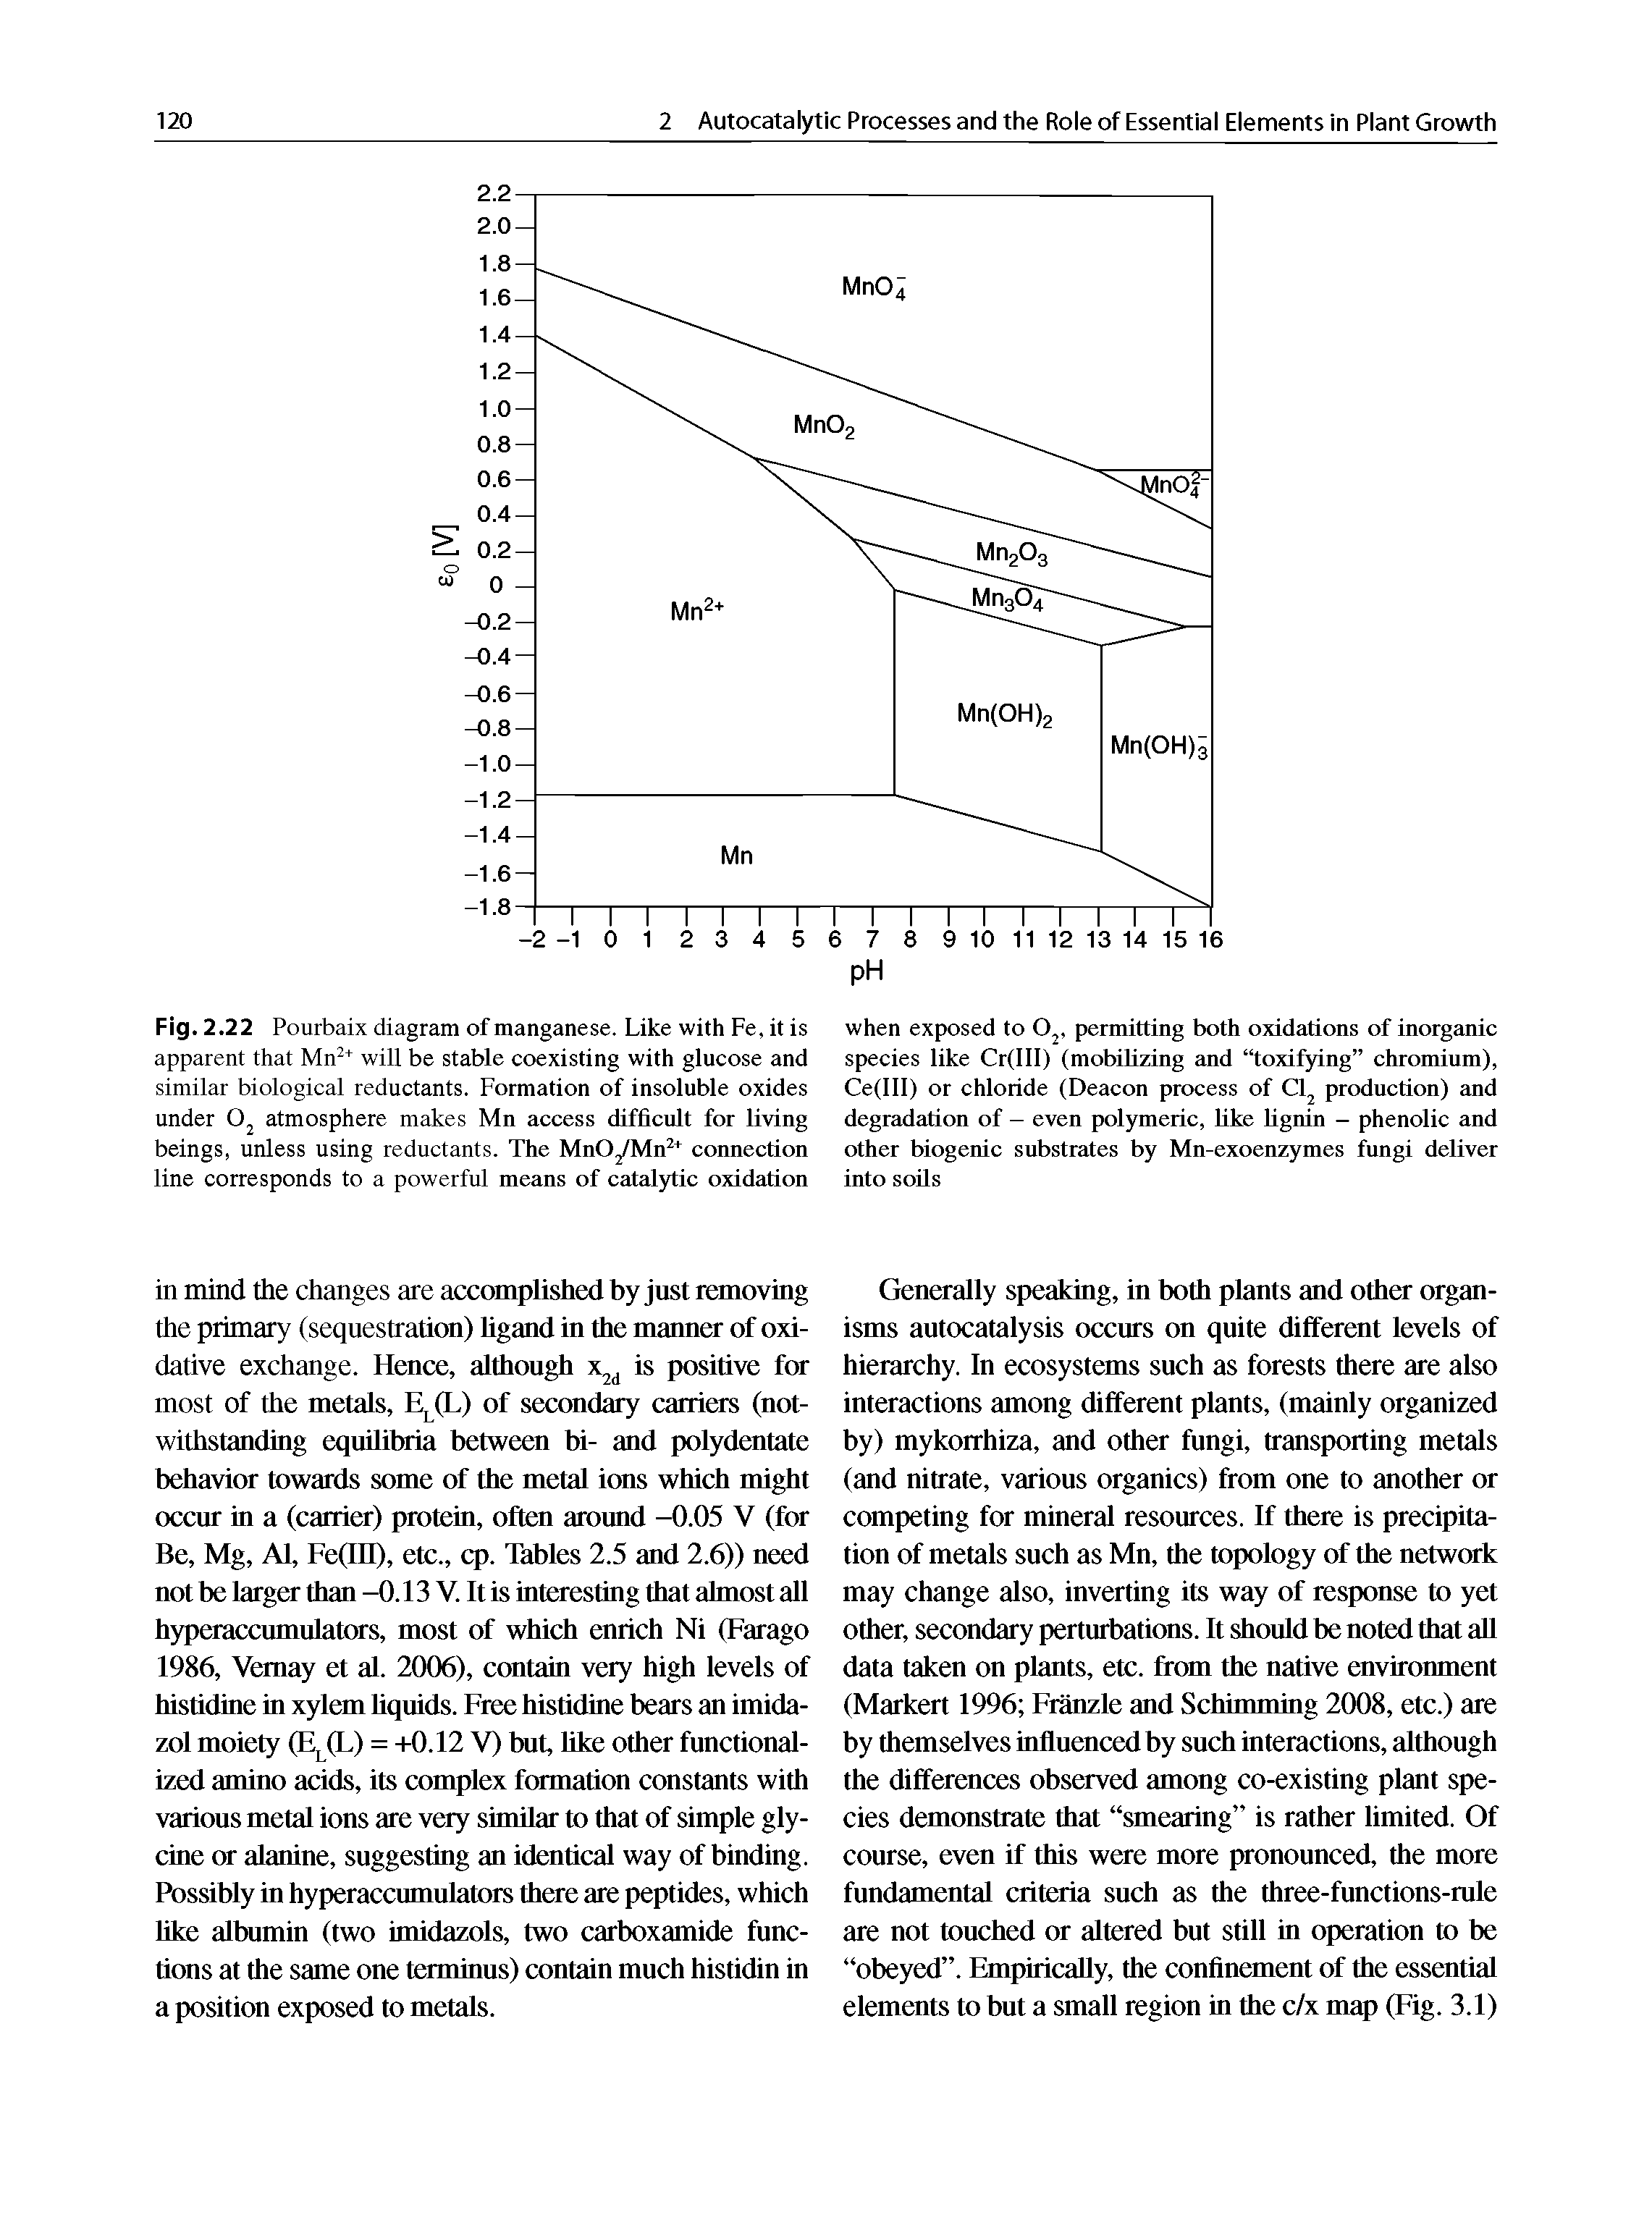 Fig. 2.22 Pourbaix diagram of manganese. Like with Fe, it is apparent that will be stable coexisting with glucose and similar biological reductants. Formation of insoluble oxides under atmosphere makes Mn access difficult for living beings, unless using reductants. The MnO /Mn connection line corresponds to a powerful means of catalytic oxidation...